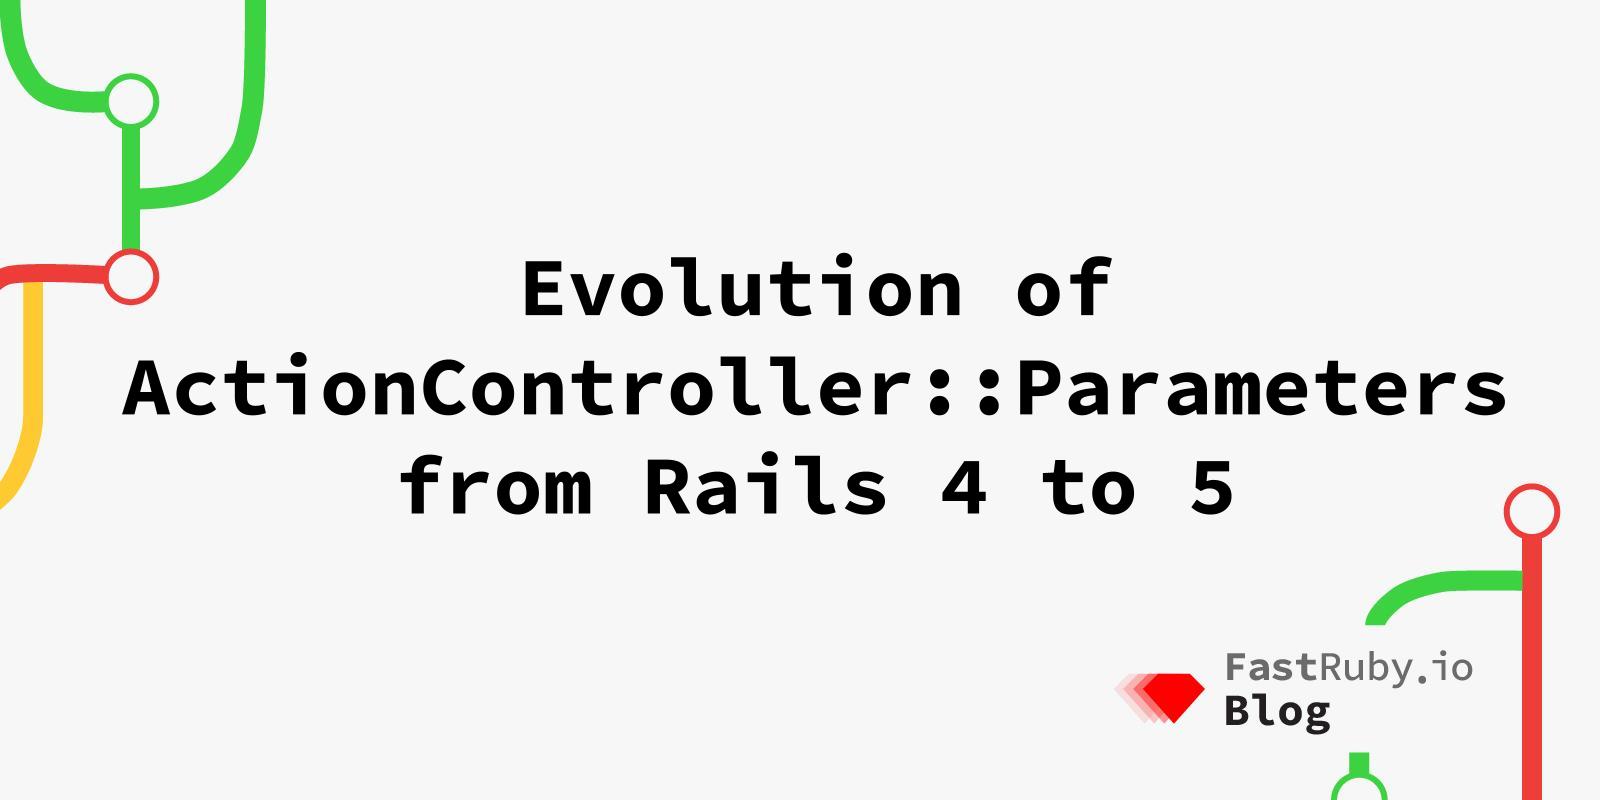 Evolution of ActionController::Parameters from Rails 4 to 5